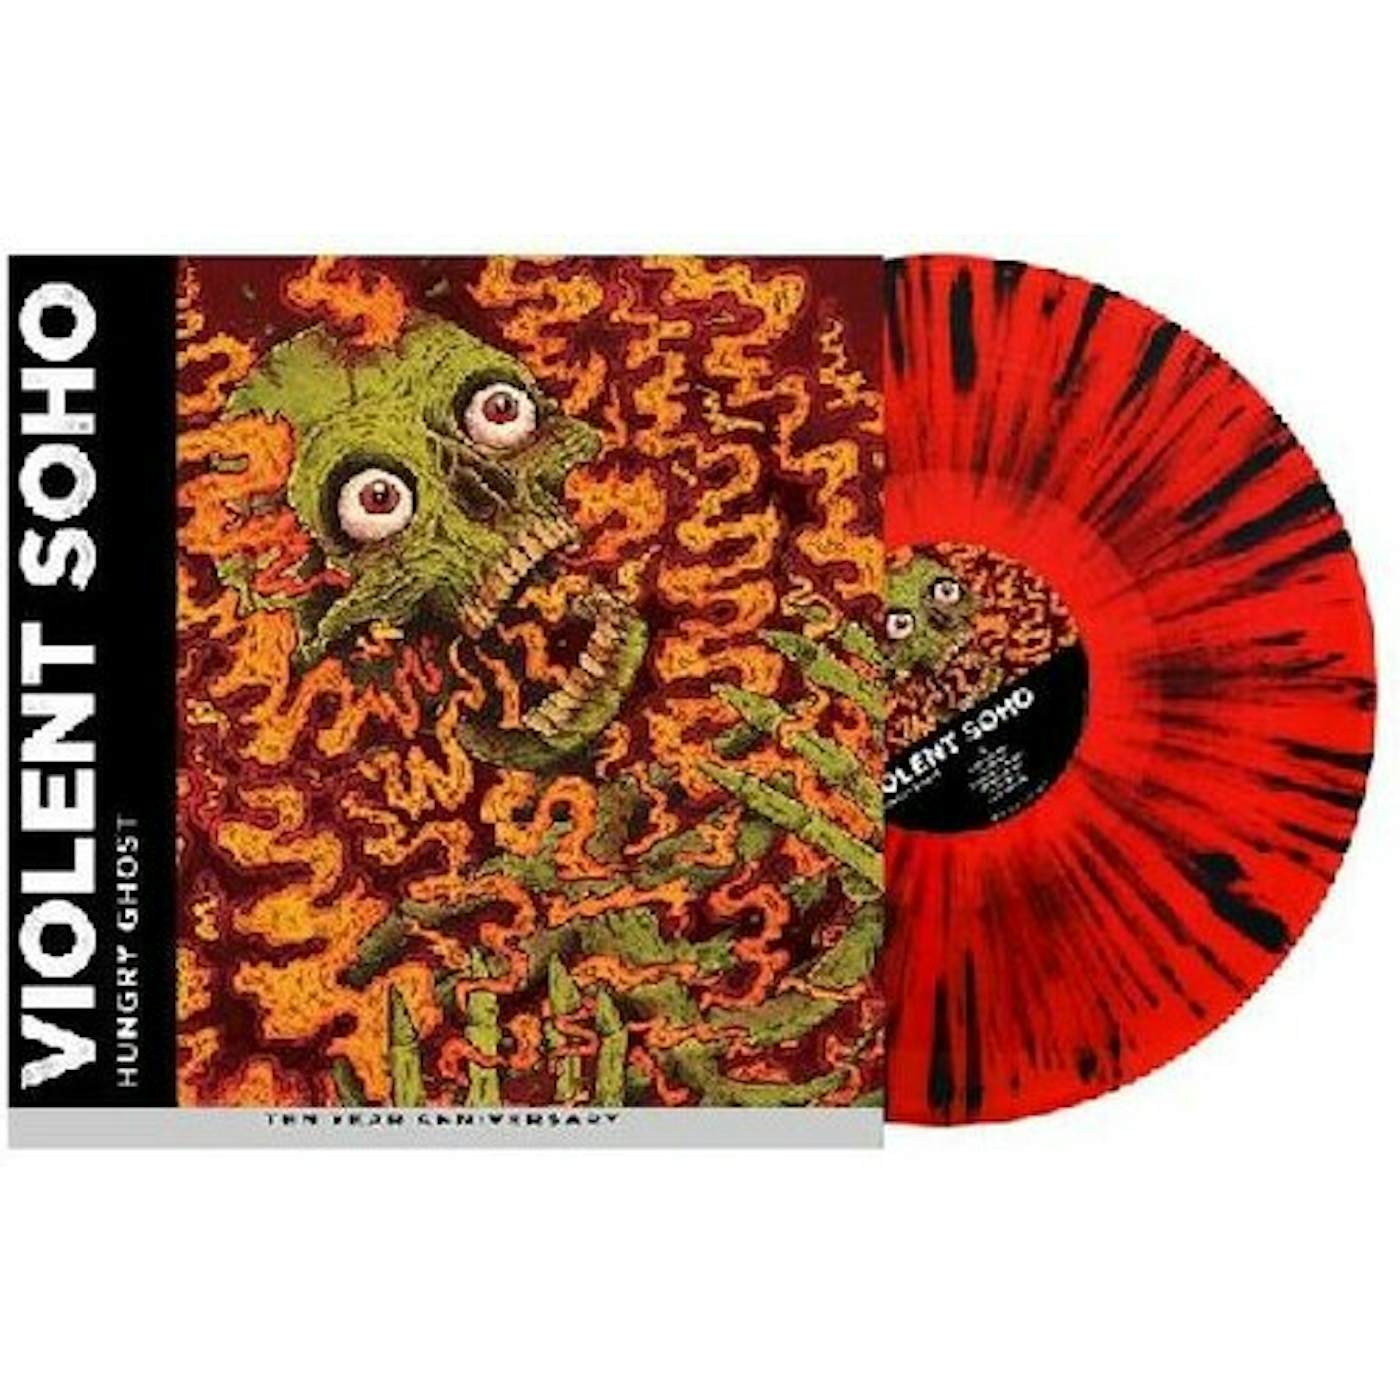 Violent Soho HUNGRY GHOST (10 YEAR ANNIVERSARY EDITION) Vinyl Record